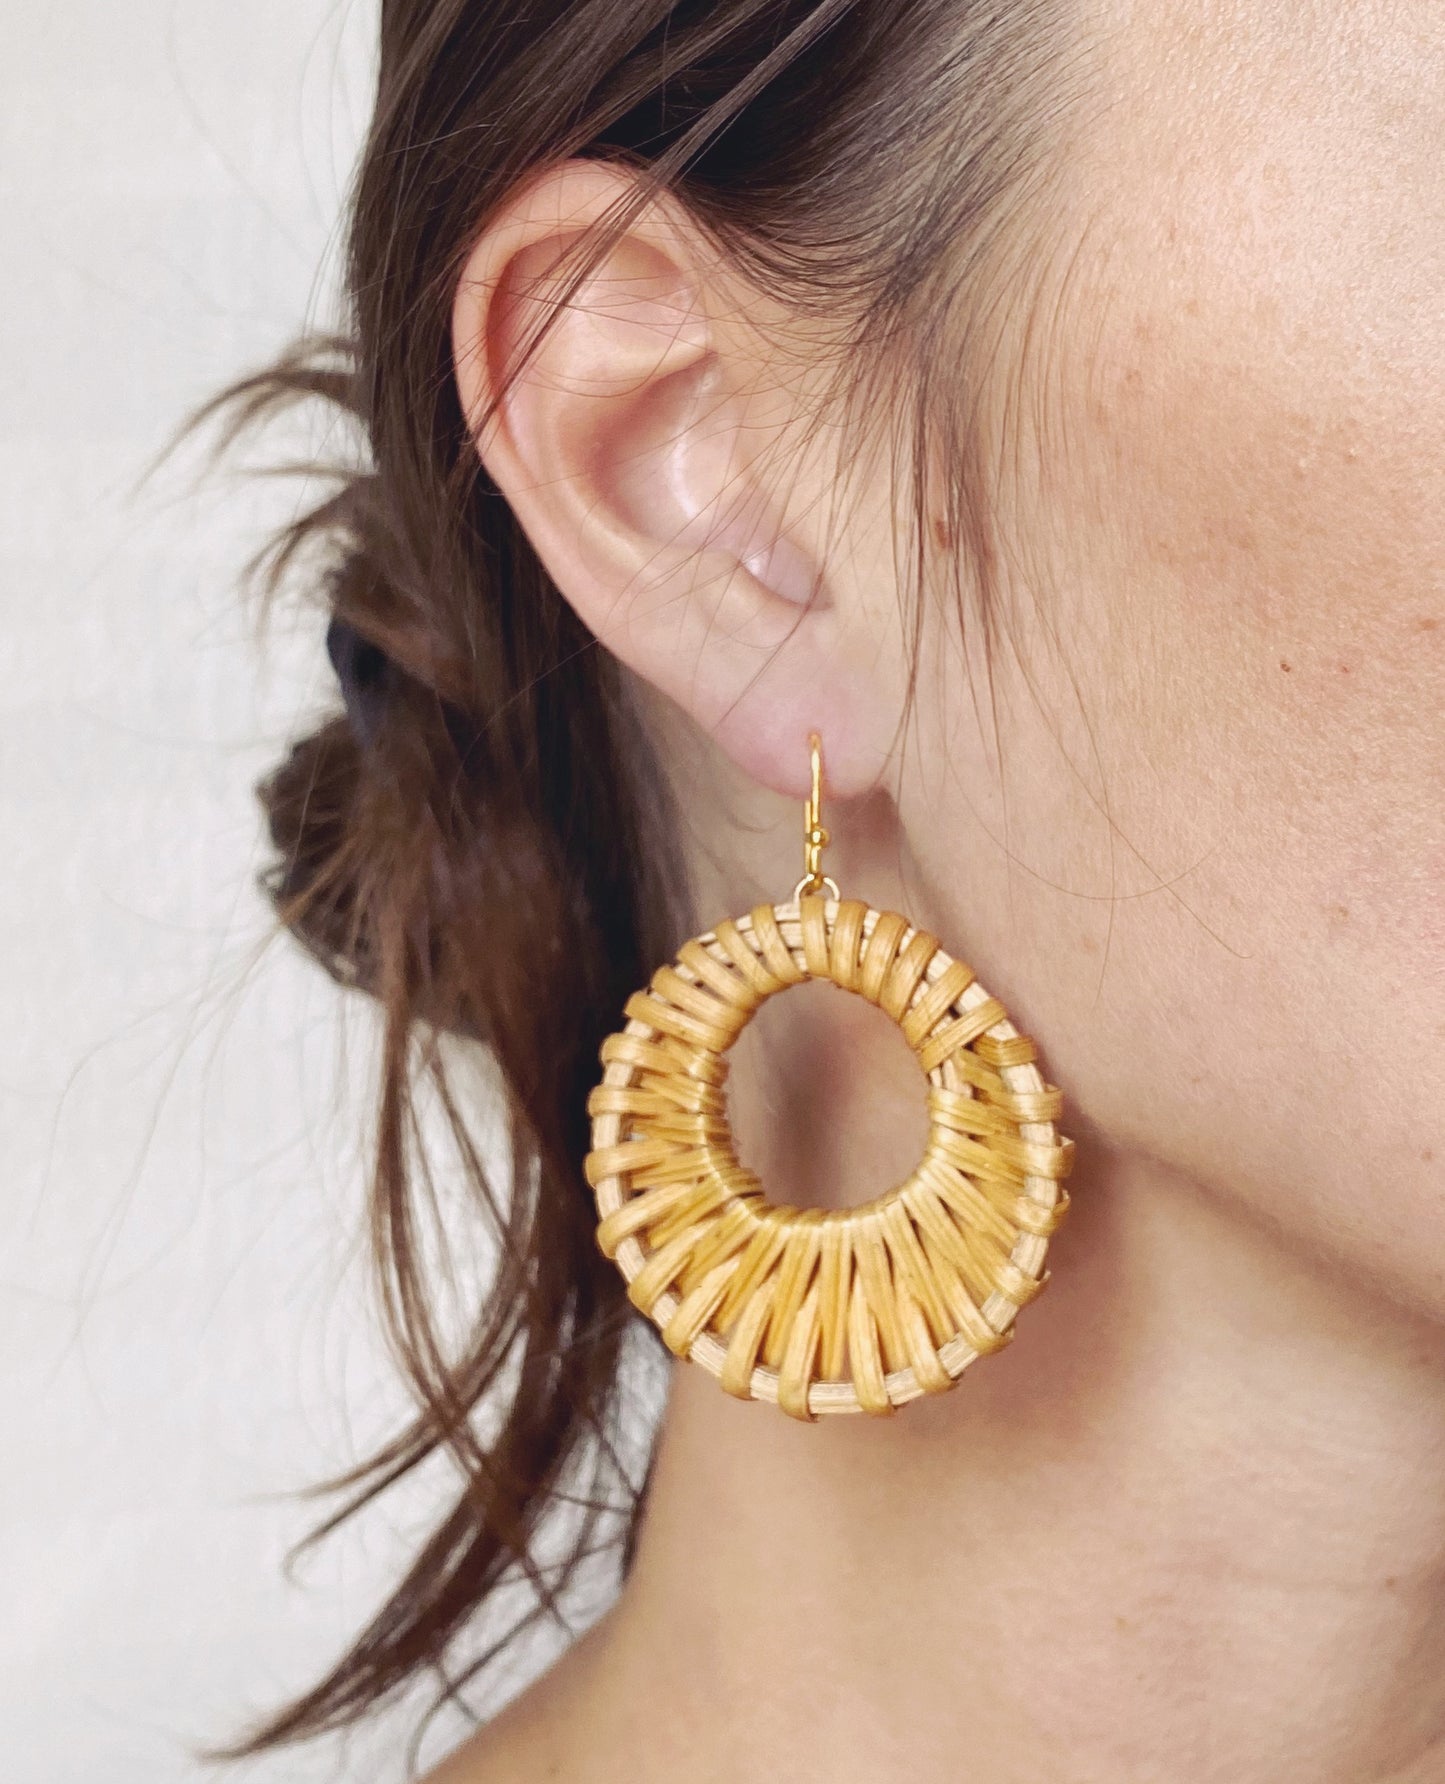 Handmade, natural, and lightweight statement earrings. These rattan earrings are perfect for a special occasion or casual everyday wear. Pair with any style.